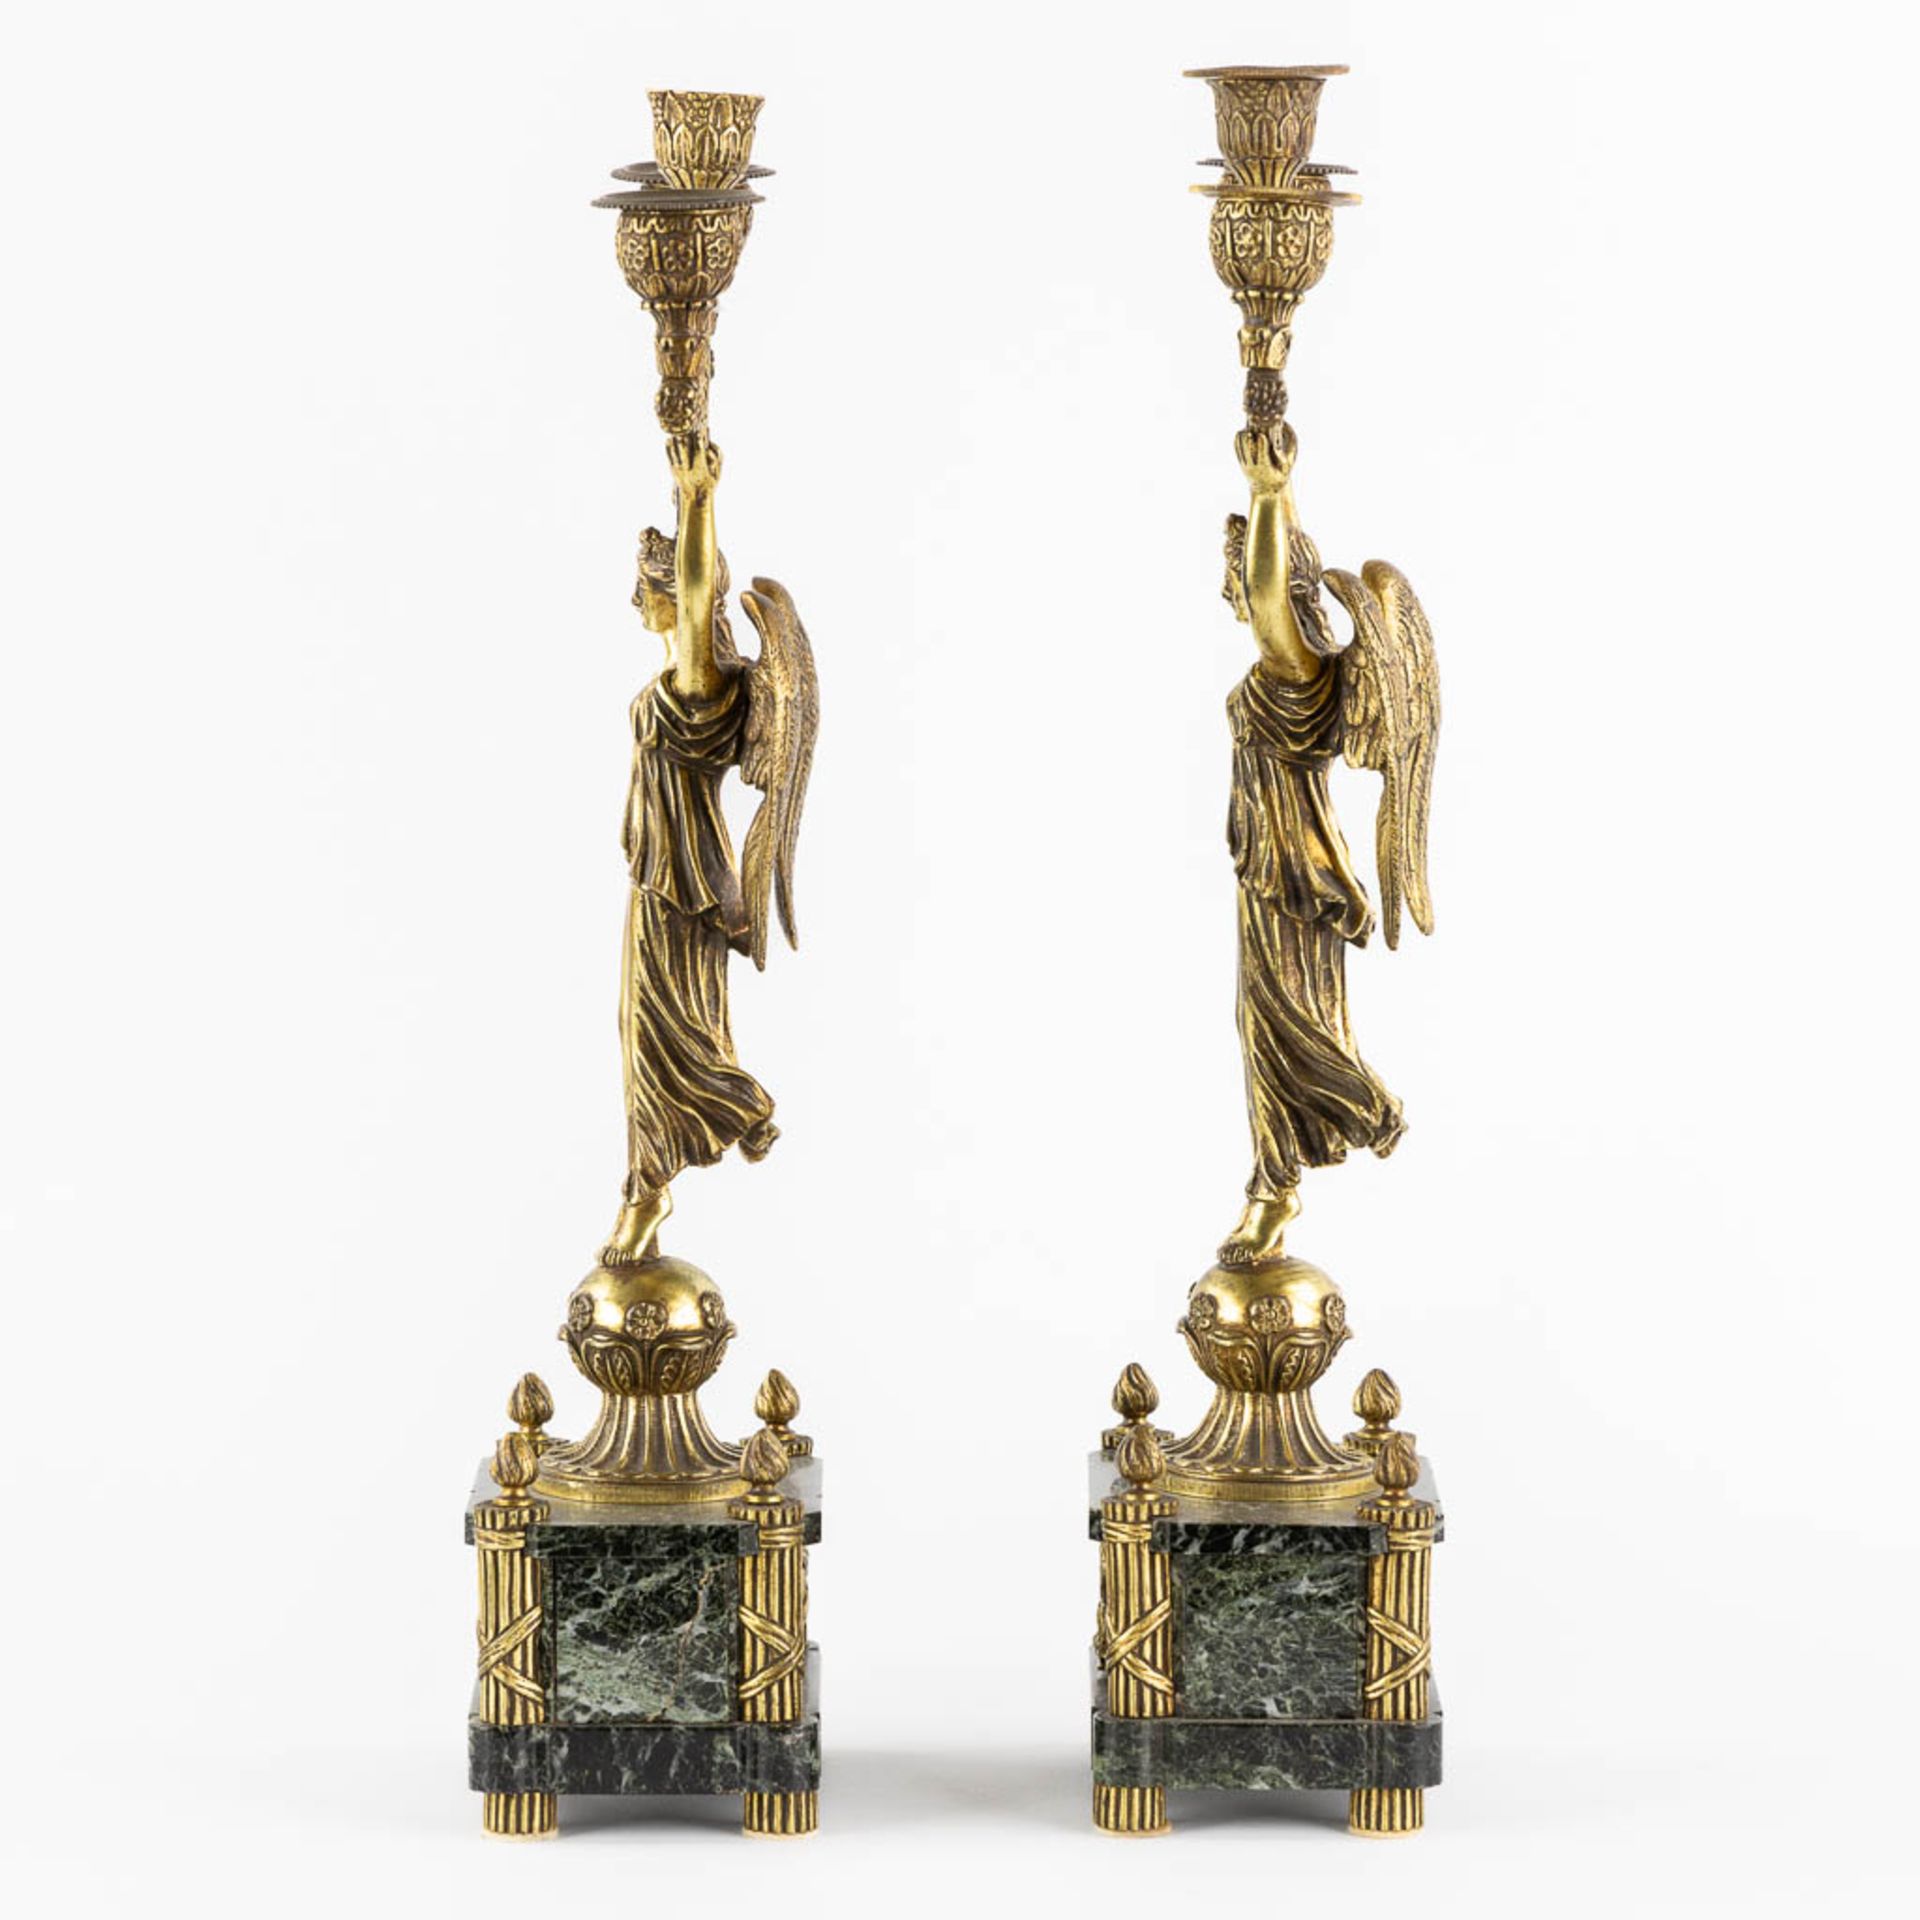 Two pairs of candelabra, bronze and cloisonné, Empire and Louis XVI style. (H:49 x D:26 cm) - Bild 13 aus 18